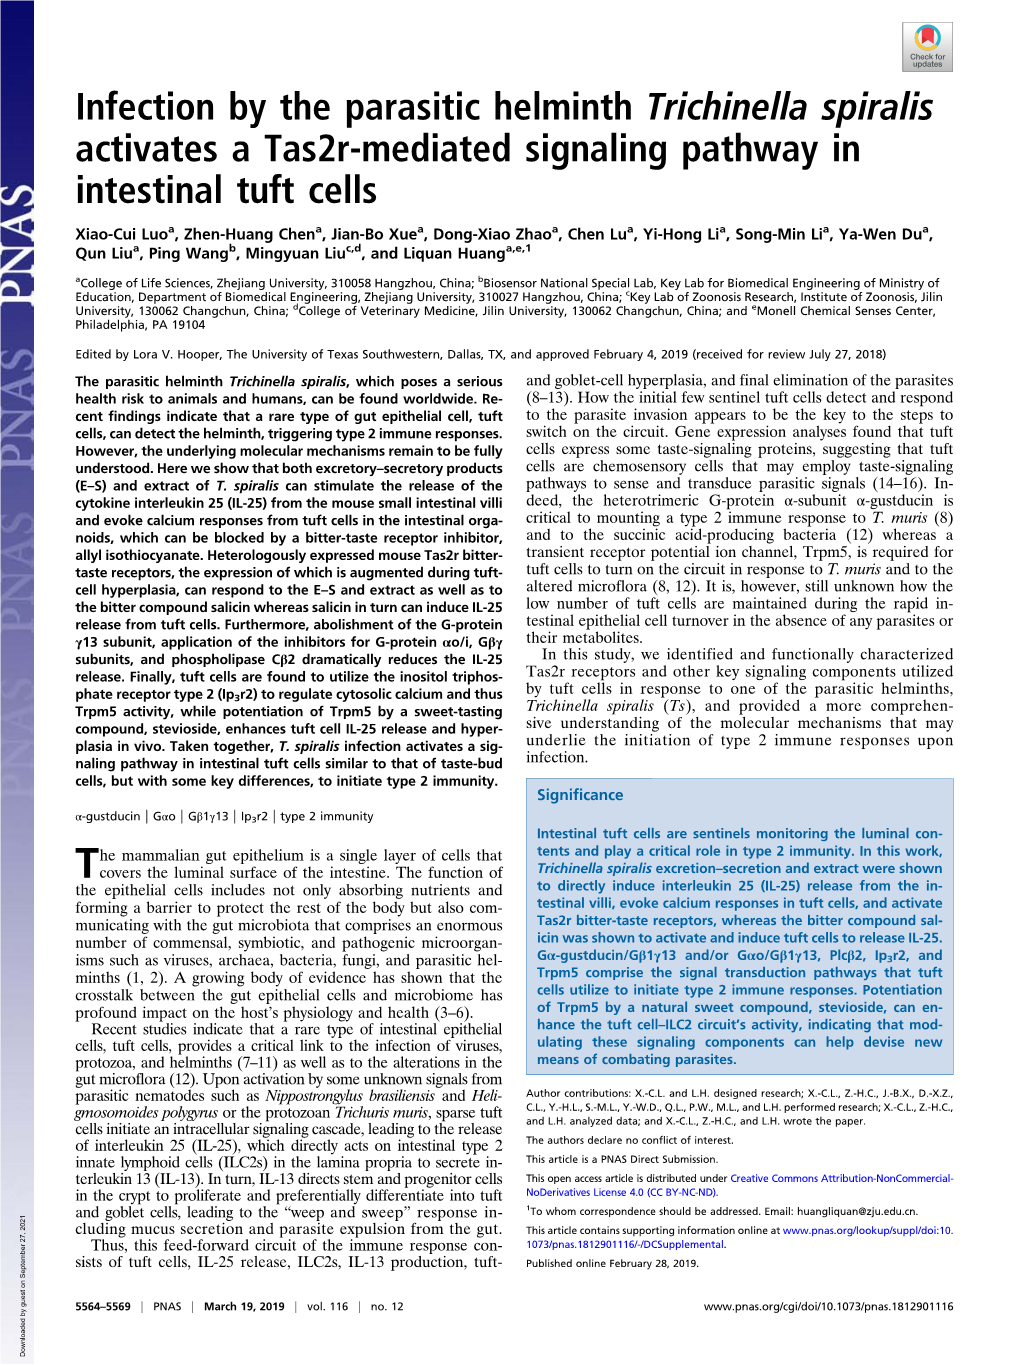 Infection by the Parasitic Helminth Trichinella Spiralis Activates a Tas2r-Mediated Signaling Pathway in Intestinal Tuft Cells